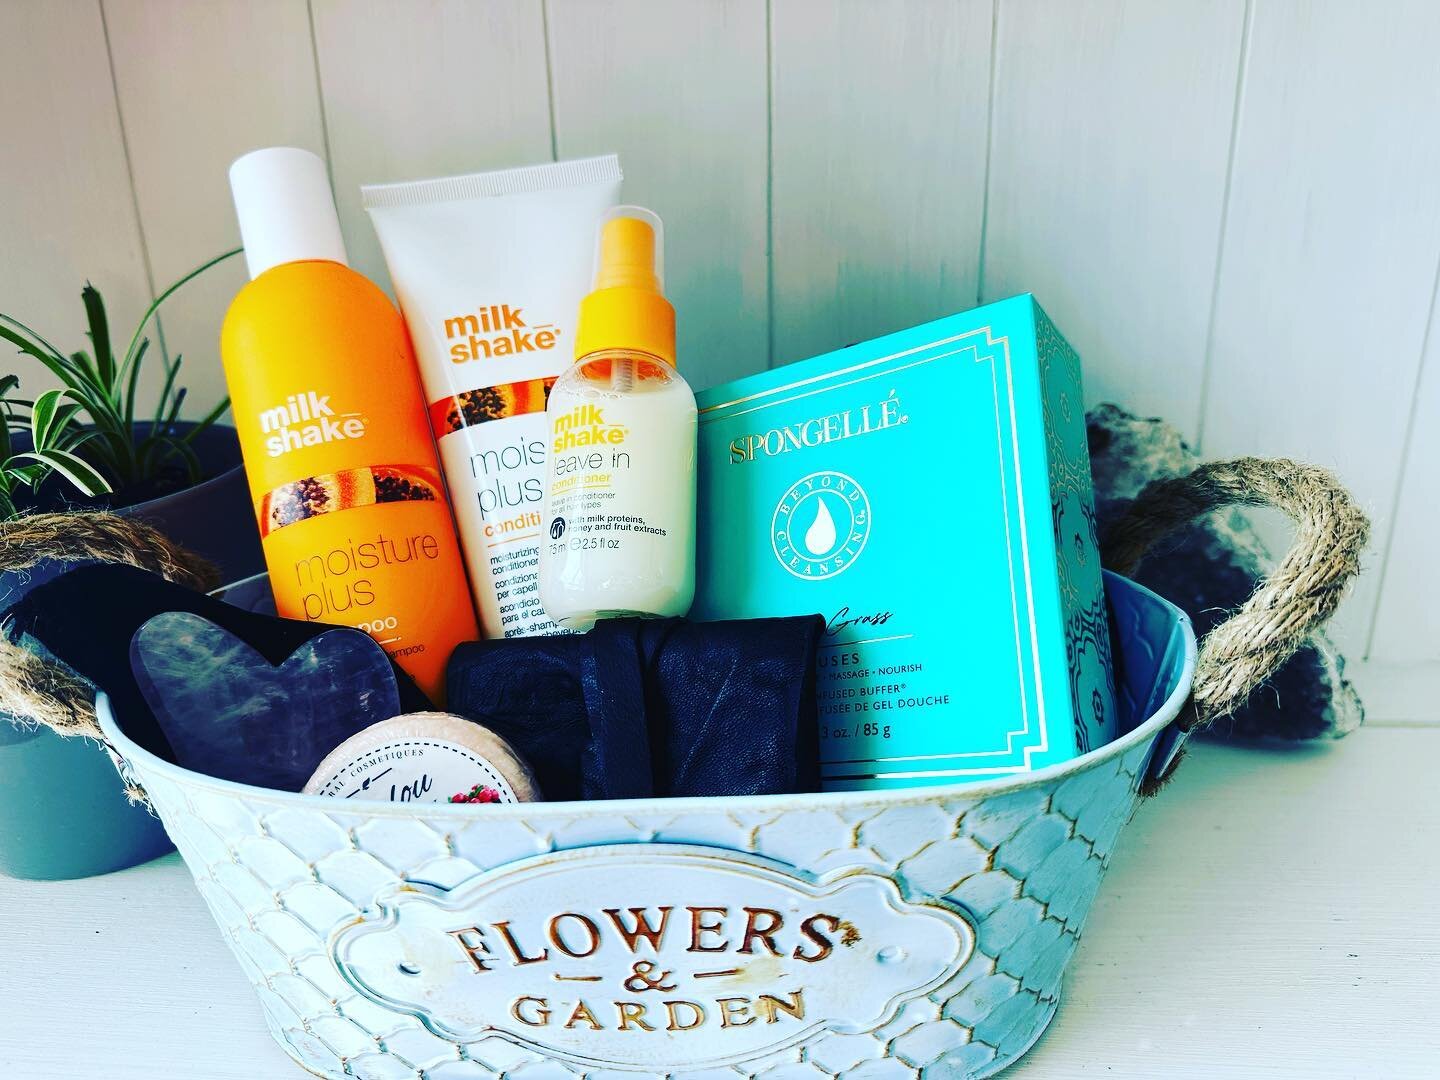 Don&rsquo;t forget☝️Mothers Day is in 27days! Make sure to pre order your baskets for mom or significant other. Make sure to treat that special lady this year ❤️ Baskets are $125 plus taxes (value is $150+) send us a DM or text or call the salon at 3